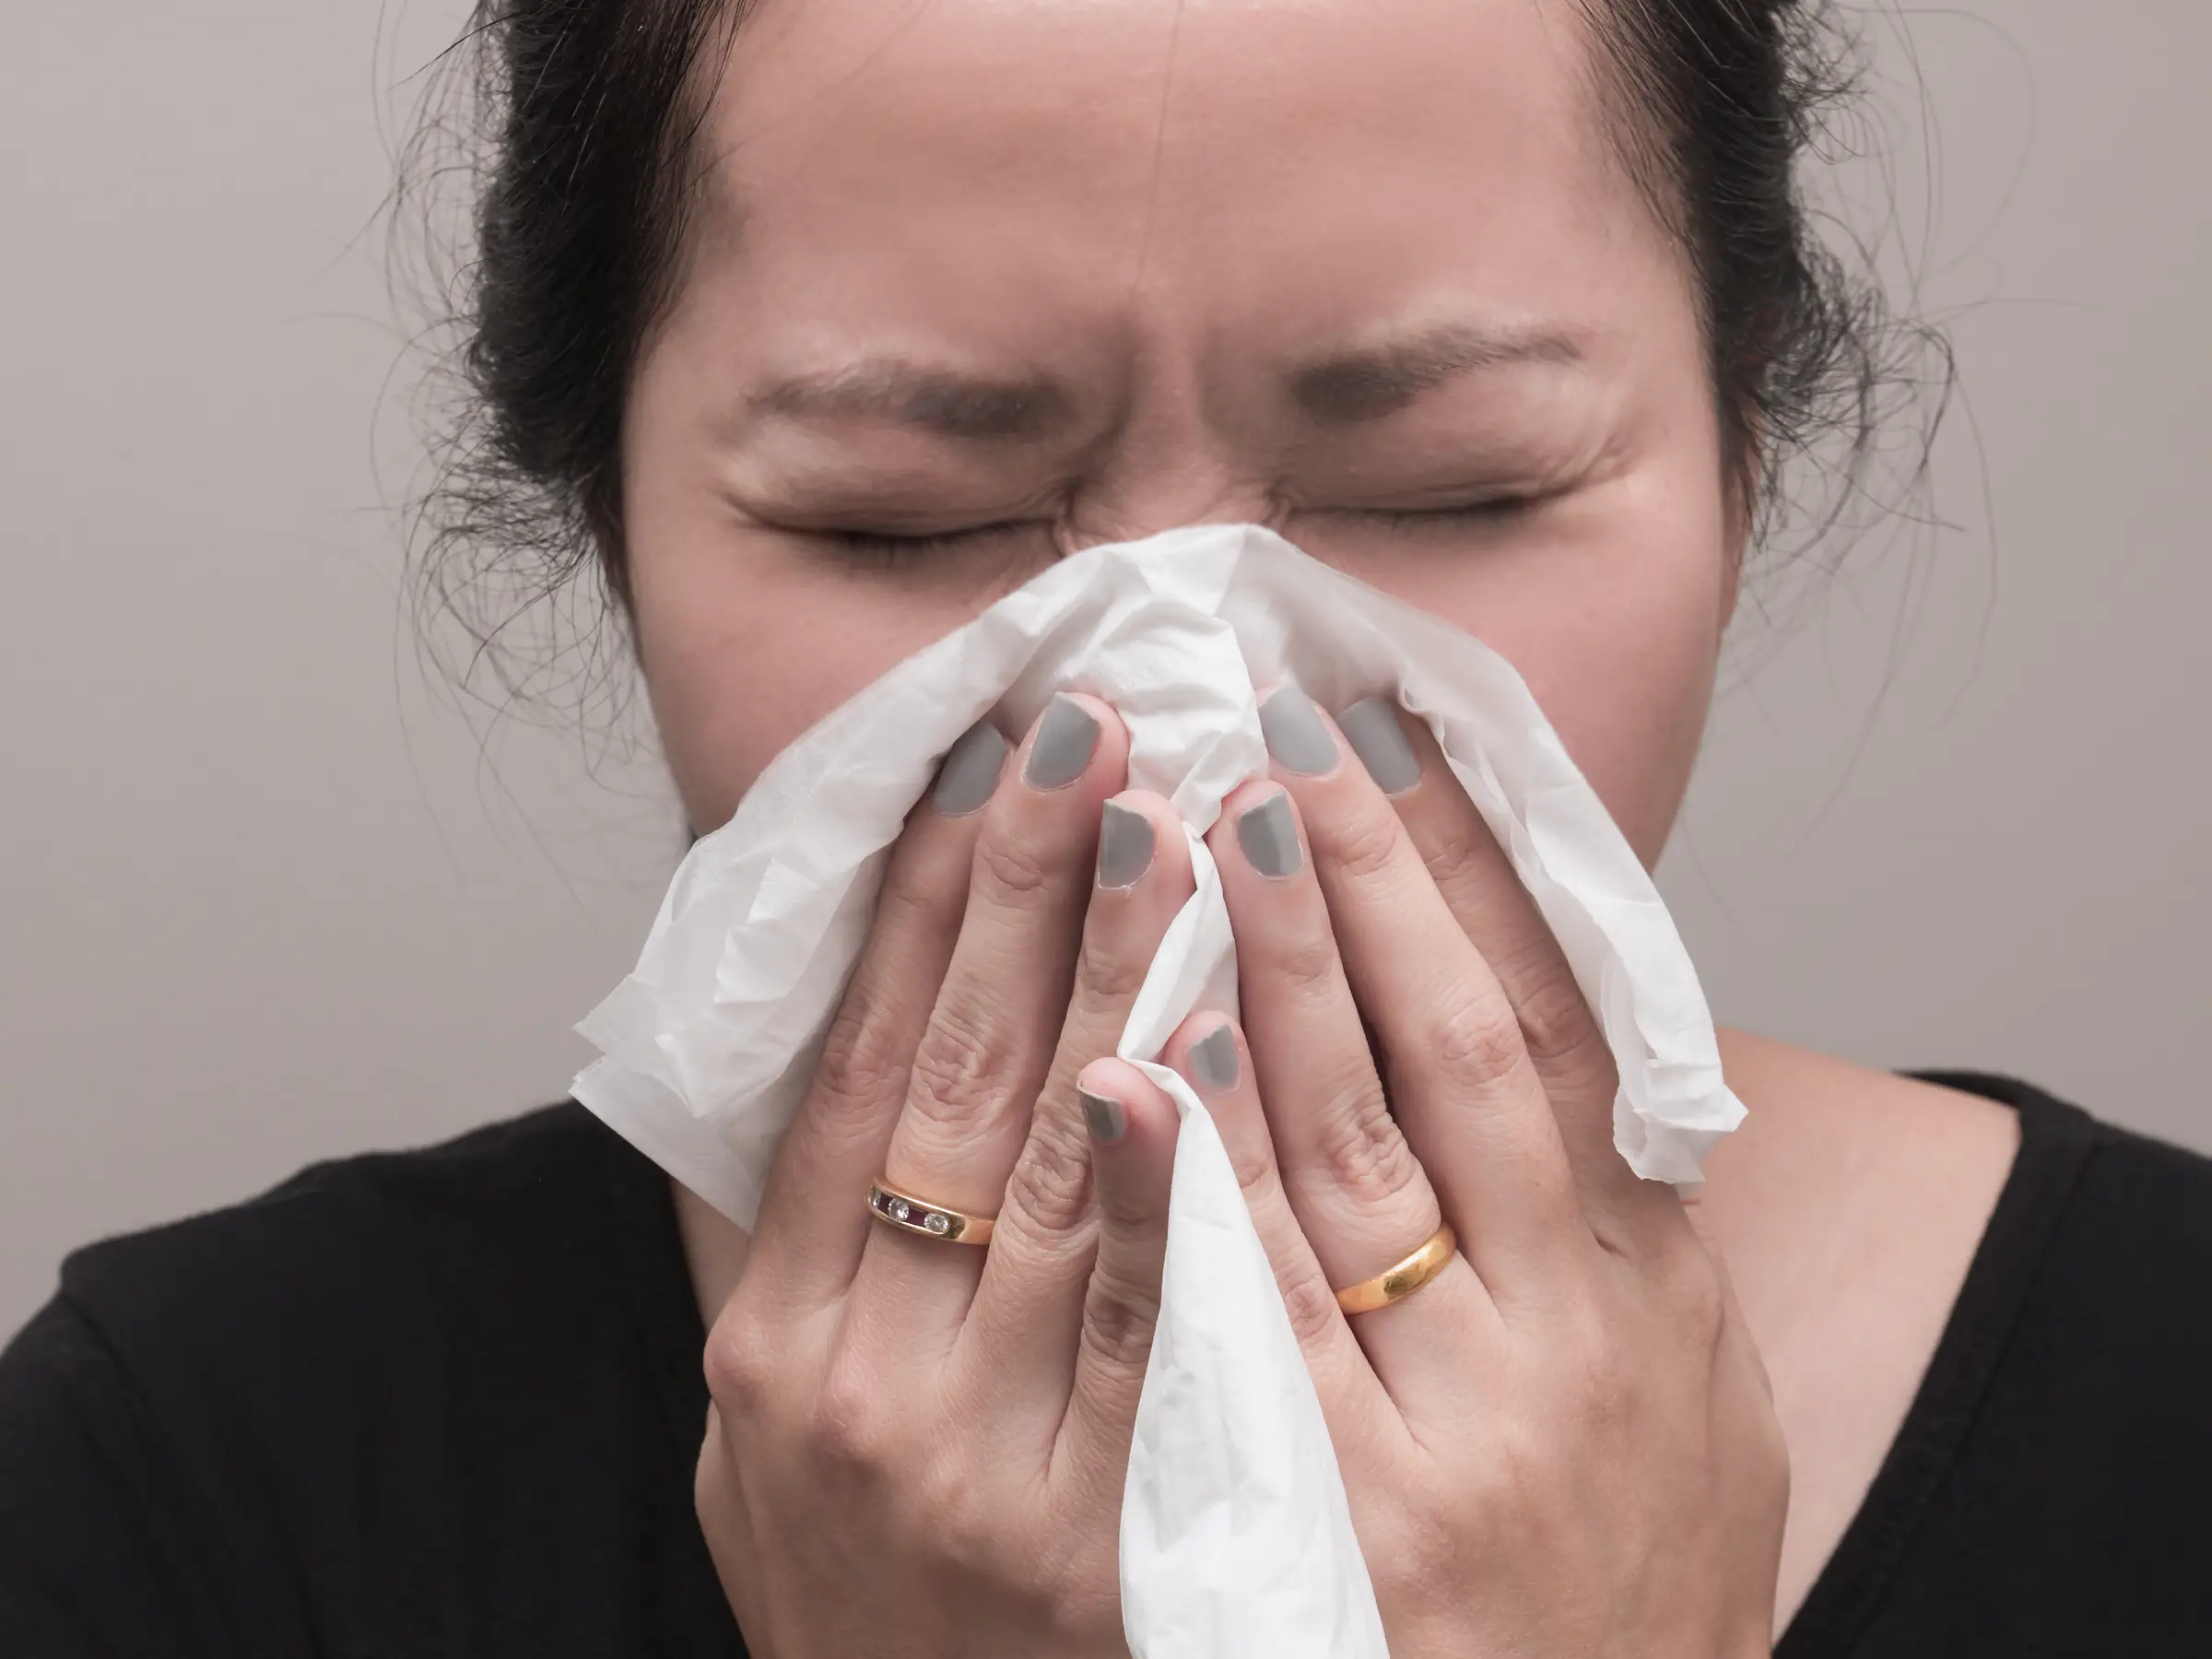 Common allergy symptoms that could mean you